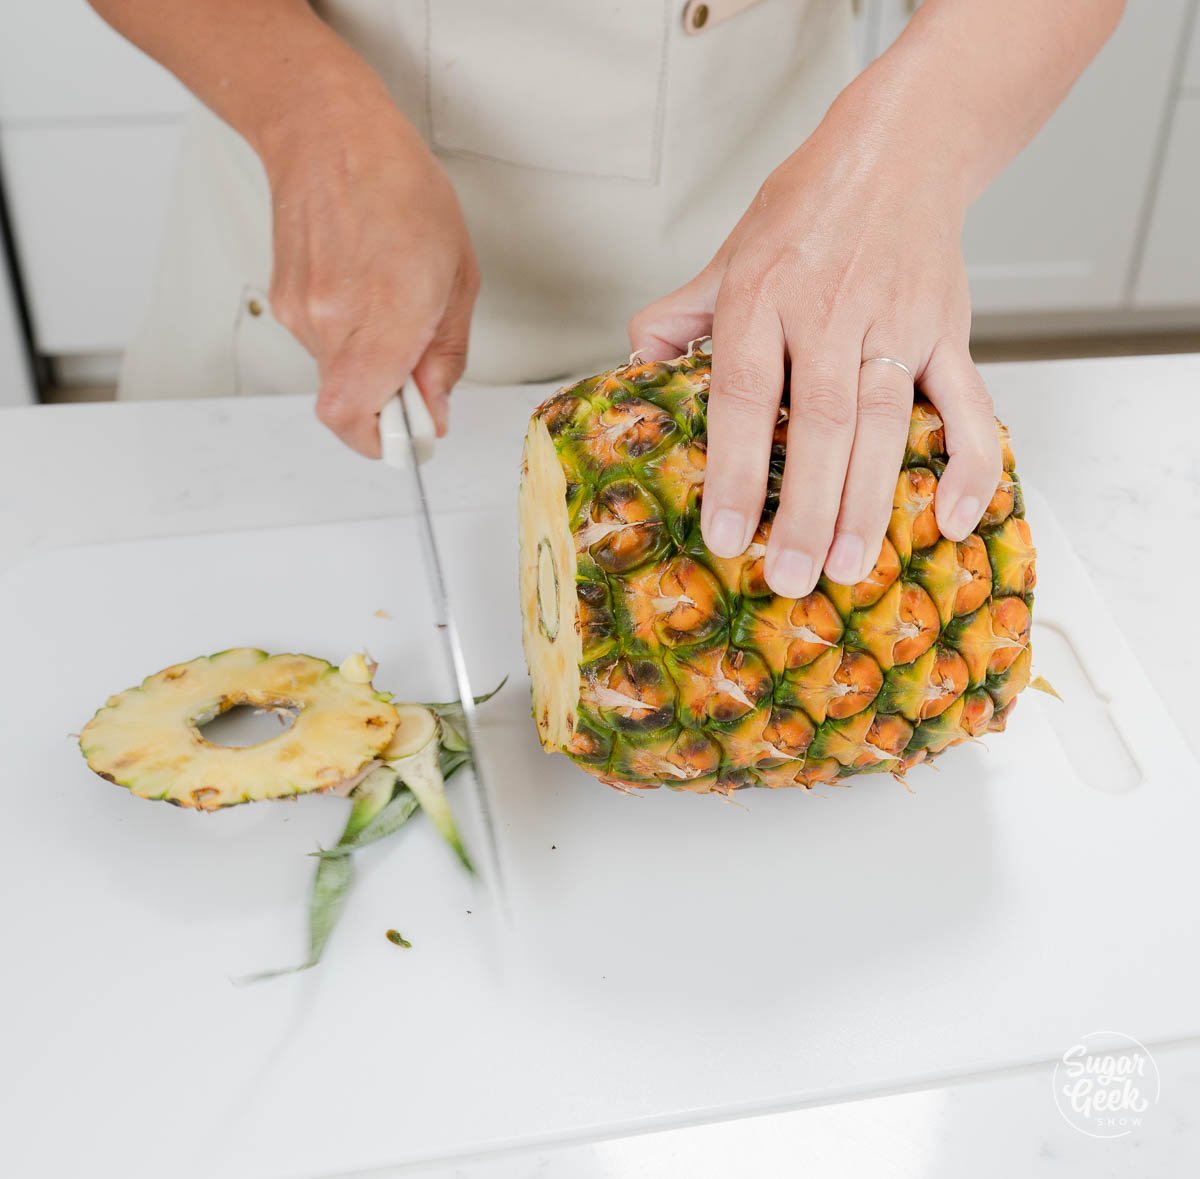 hand using knife to cut pineapple ends